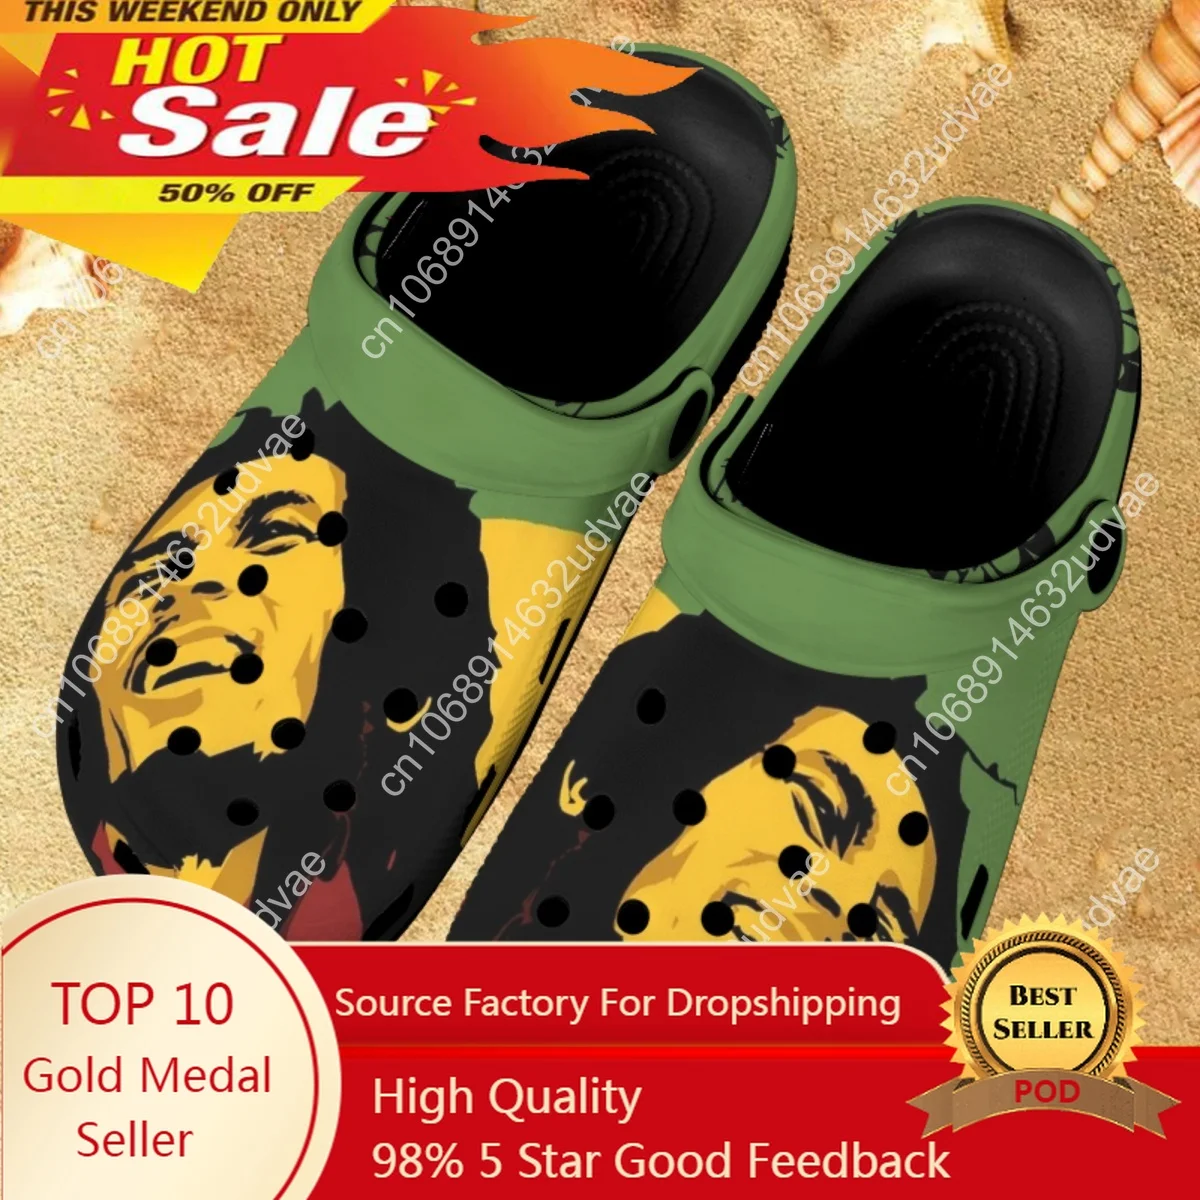 

Famous Singer Rapper Bob Marley 3D Print Unisex Cozy Slides Summer Beach Slip On Casual Slippers Clogs Garden Shoes New Zapatos